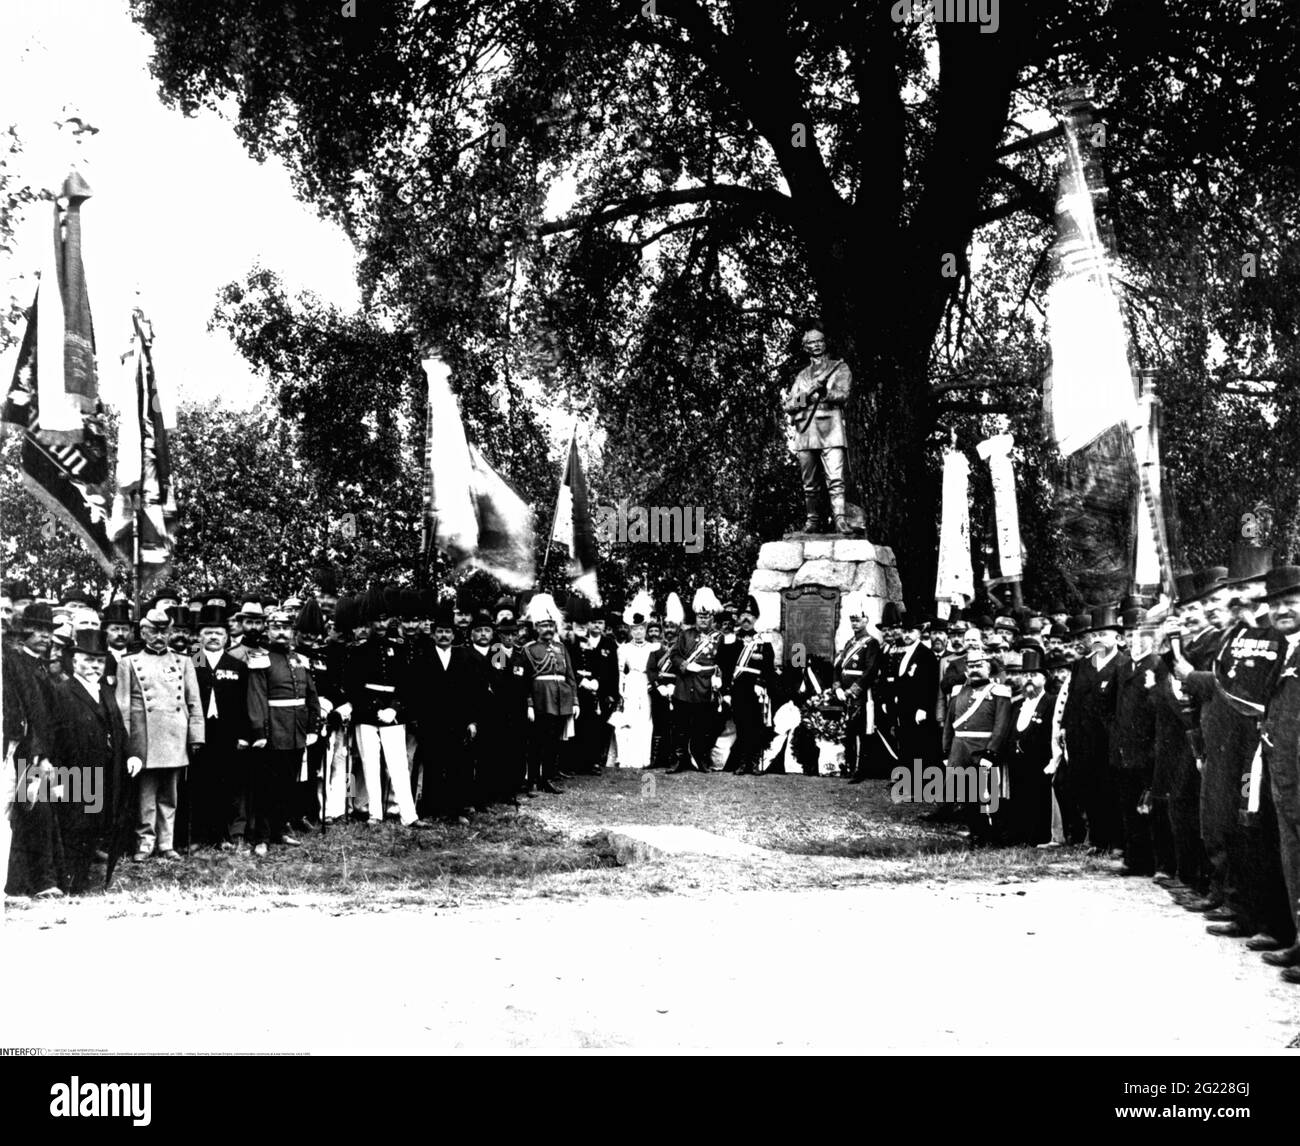 military, Germany, German Empire, commemorative ceremony at a war memorial, circa 1900, ADDITIONAL-RIGHTS-CLEARANCE-INFO-NOT-AVAILABLE Stock Photo